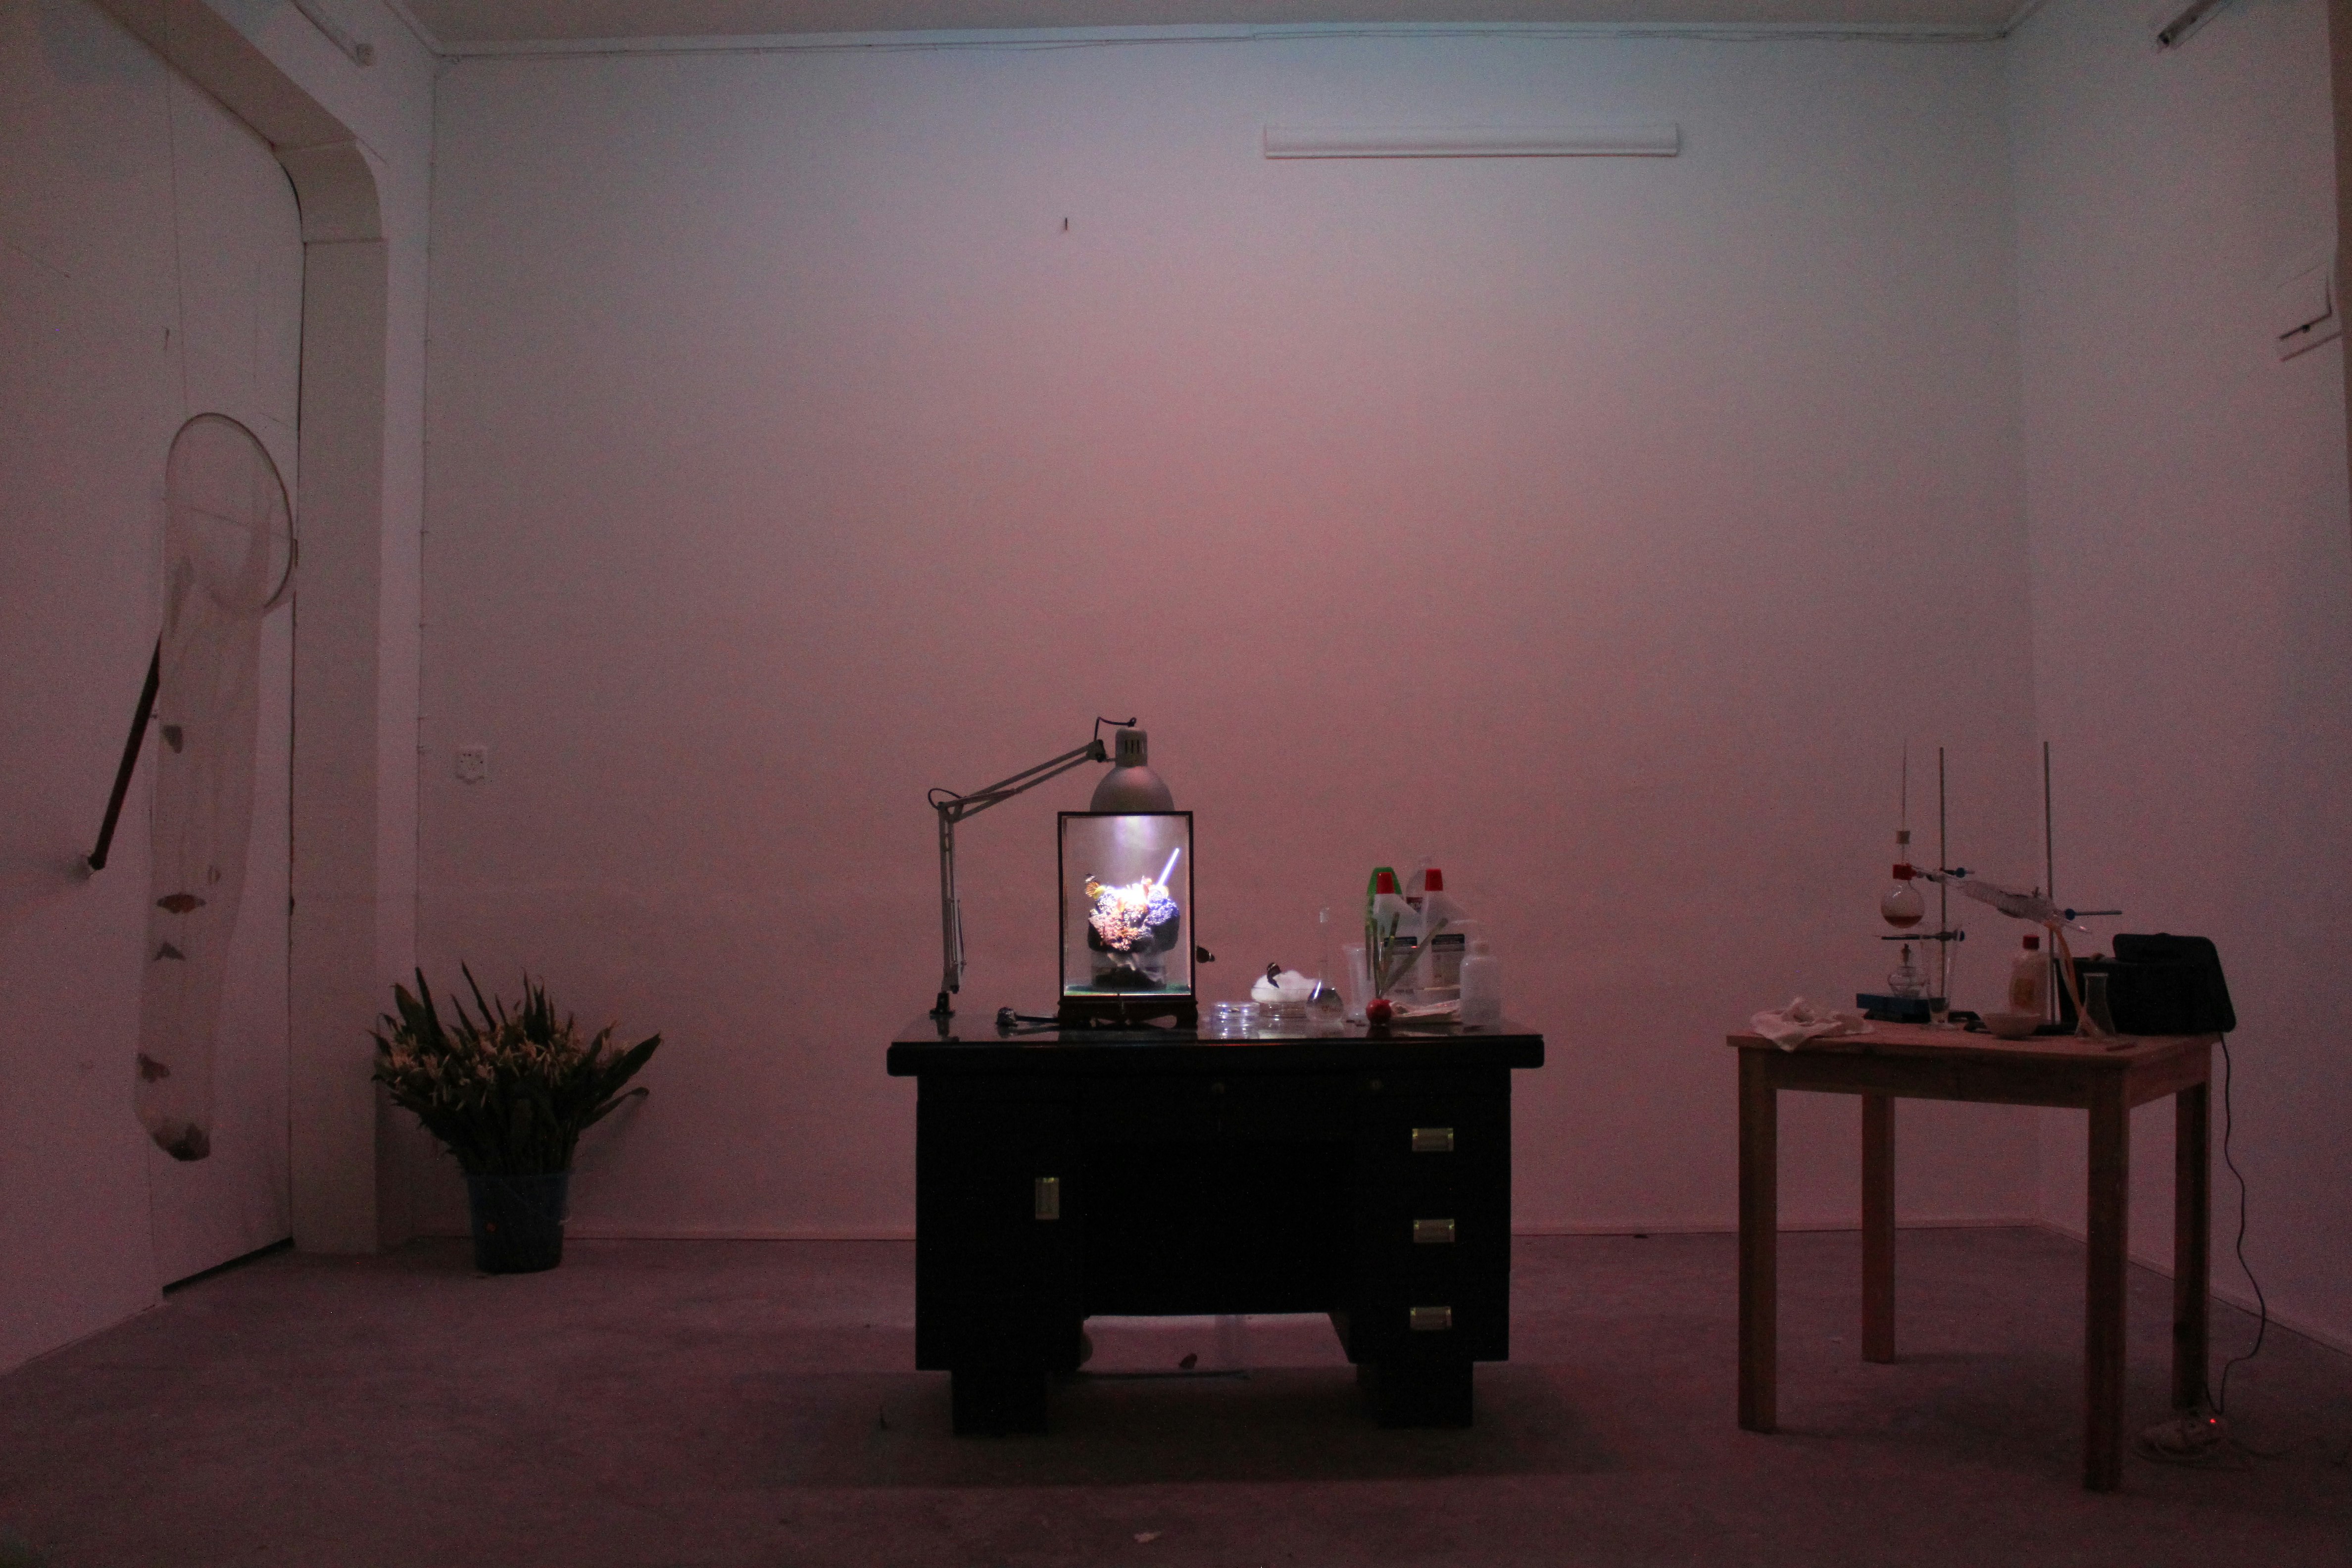 A pink-hued room with a chest of drawers bearing a lamp shining down on a glass display. On the left is a bouquet of flowers and a long mesh net.